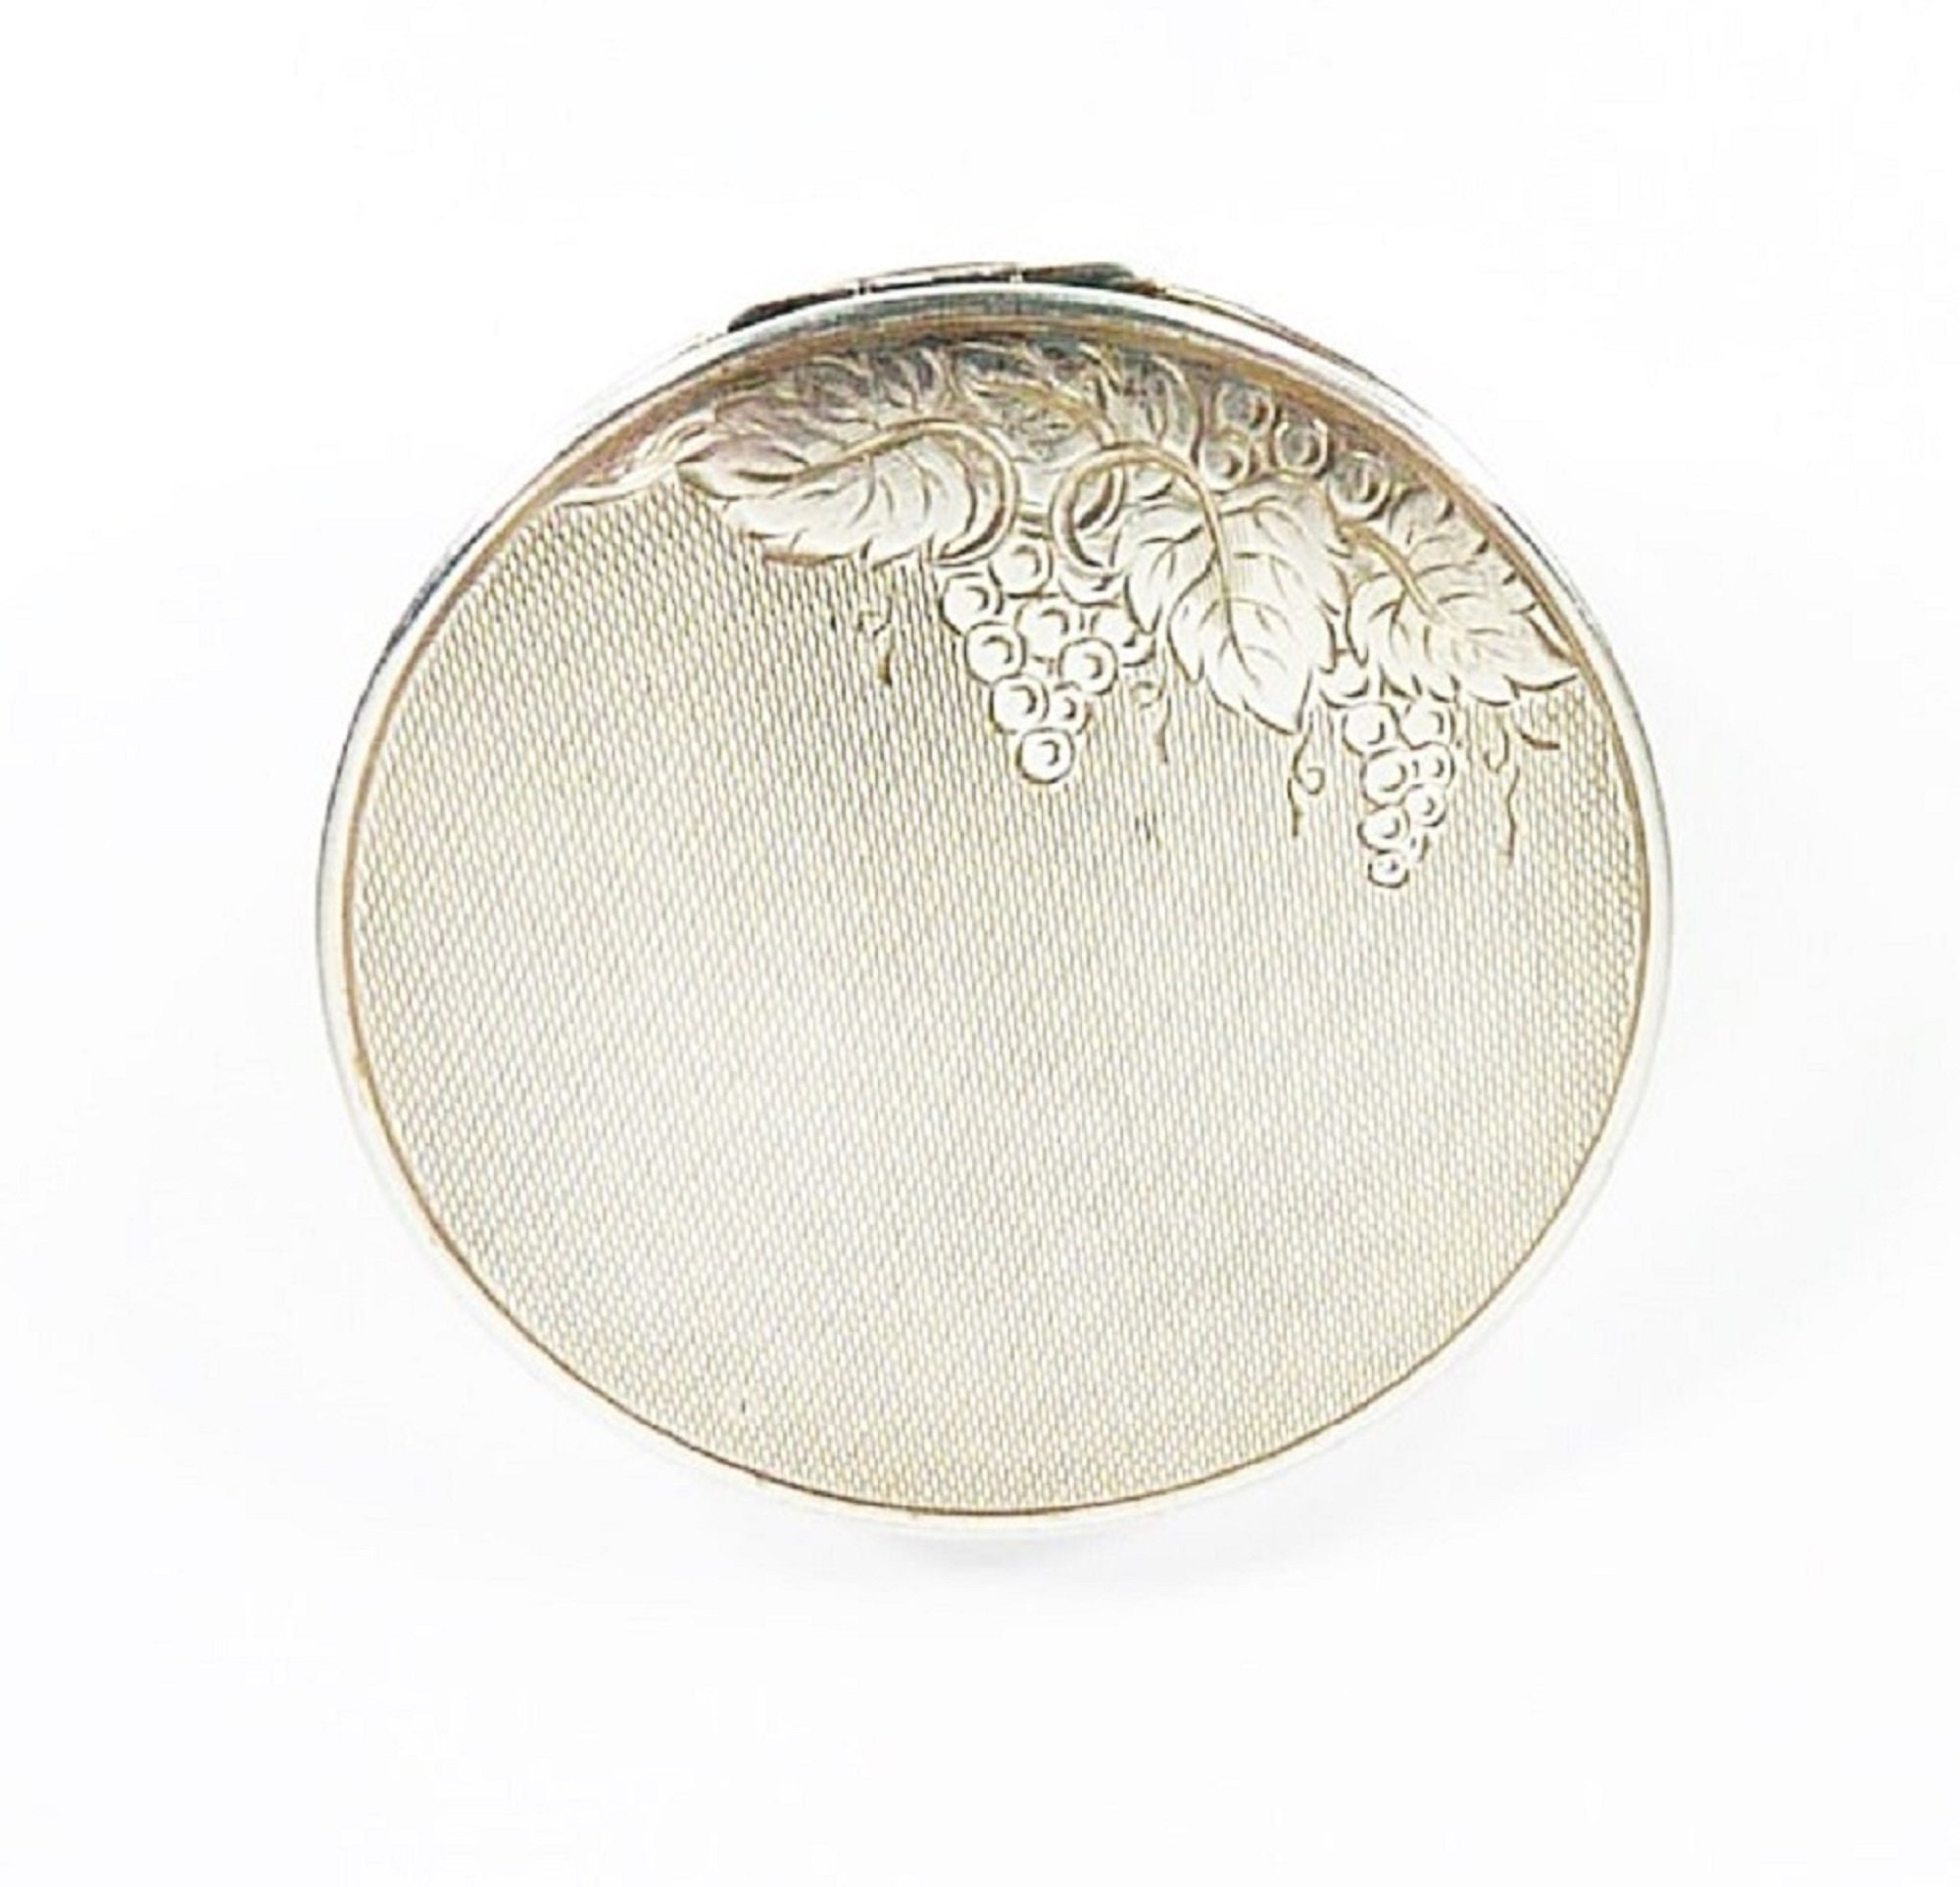 1900's Sterling Silver Compact Purse Vintage Powder Compact Change Or –  Power Of One Designs